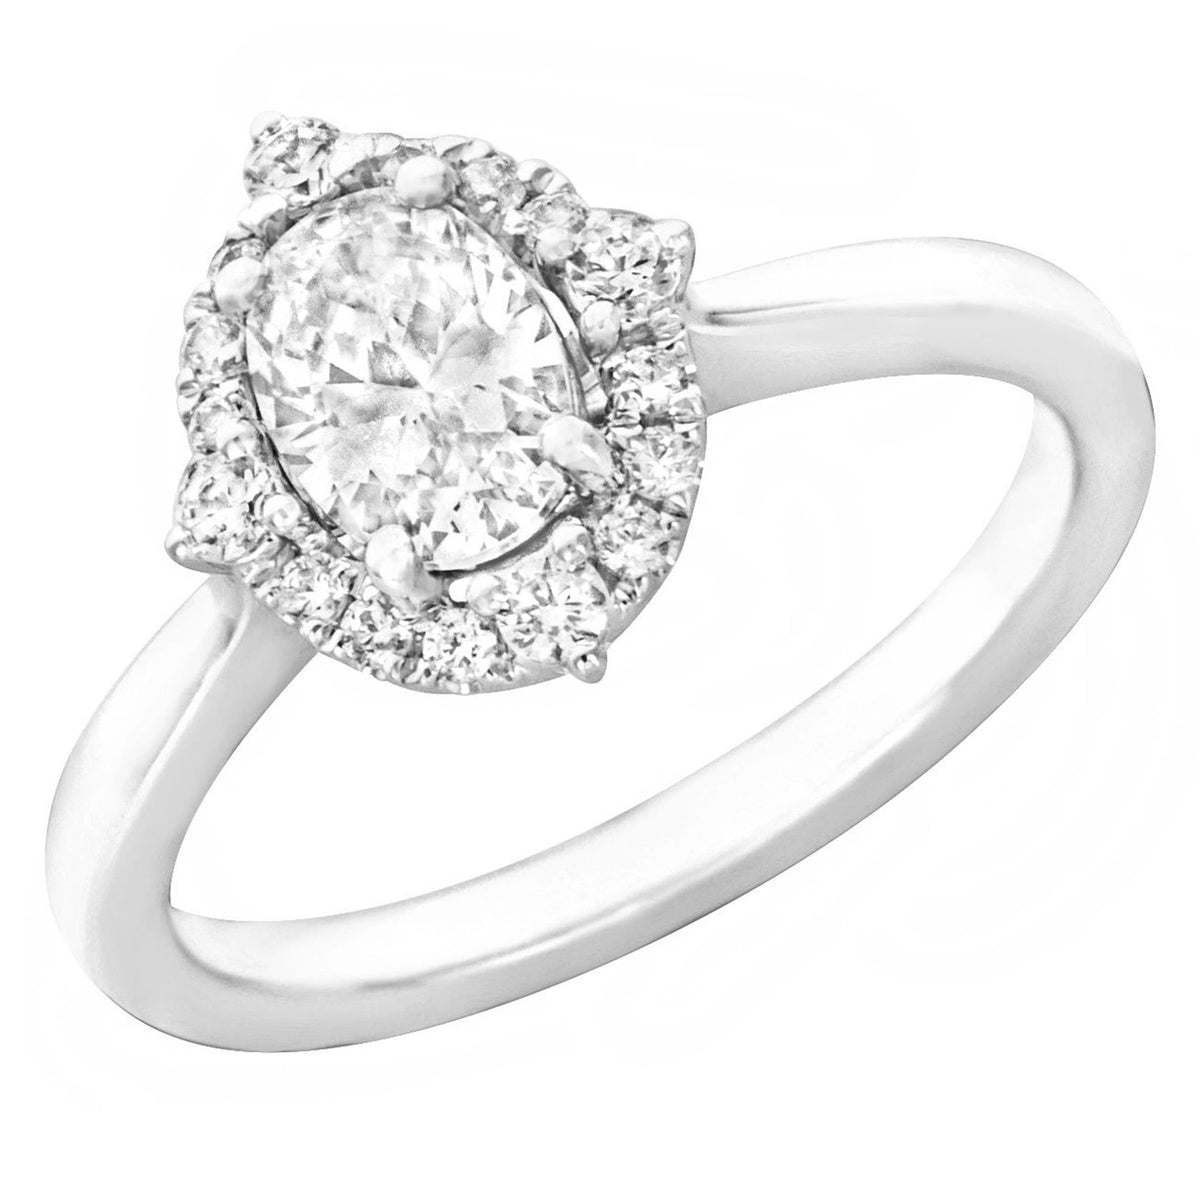 18Kt White Gold Halo Engagement Ring Mounting With 0.22cttw Natural Diamonds